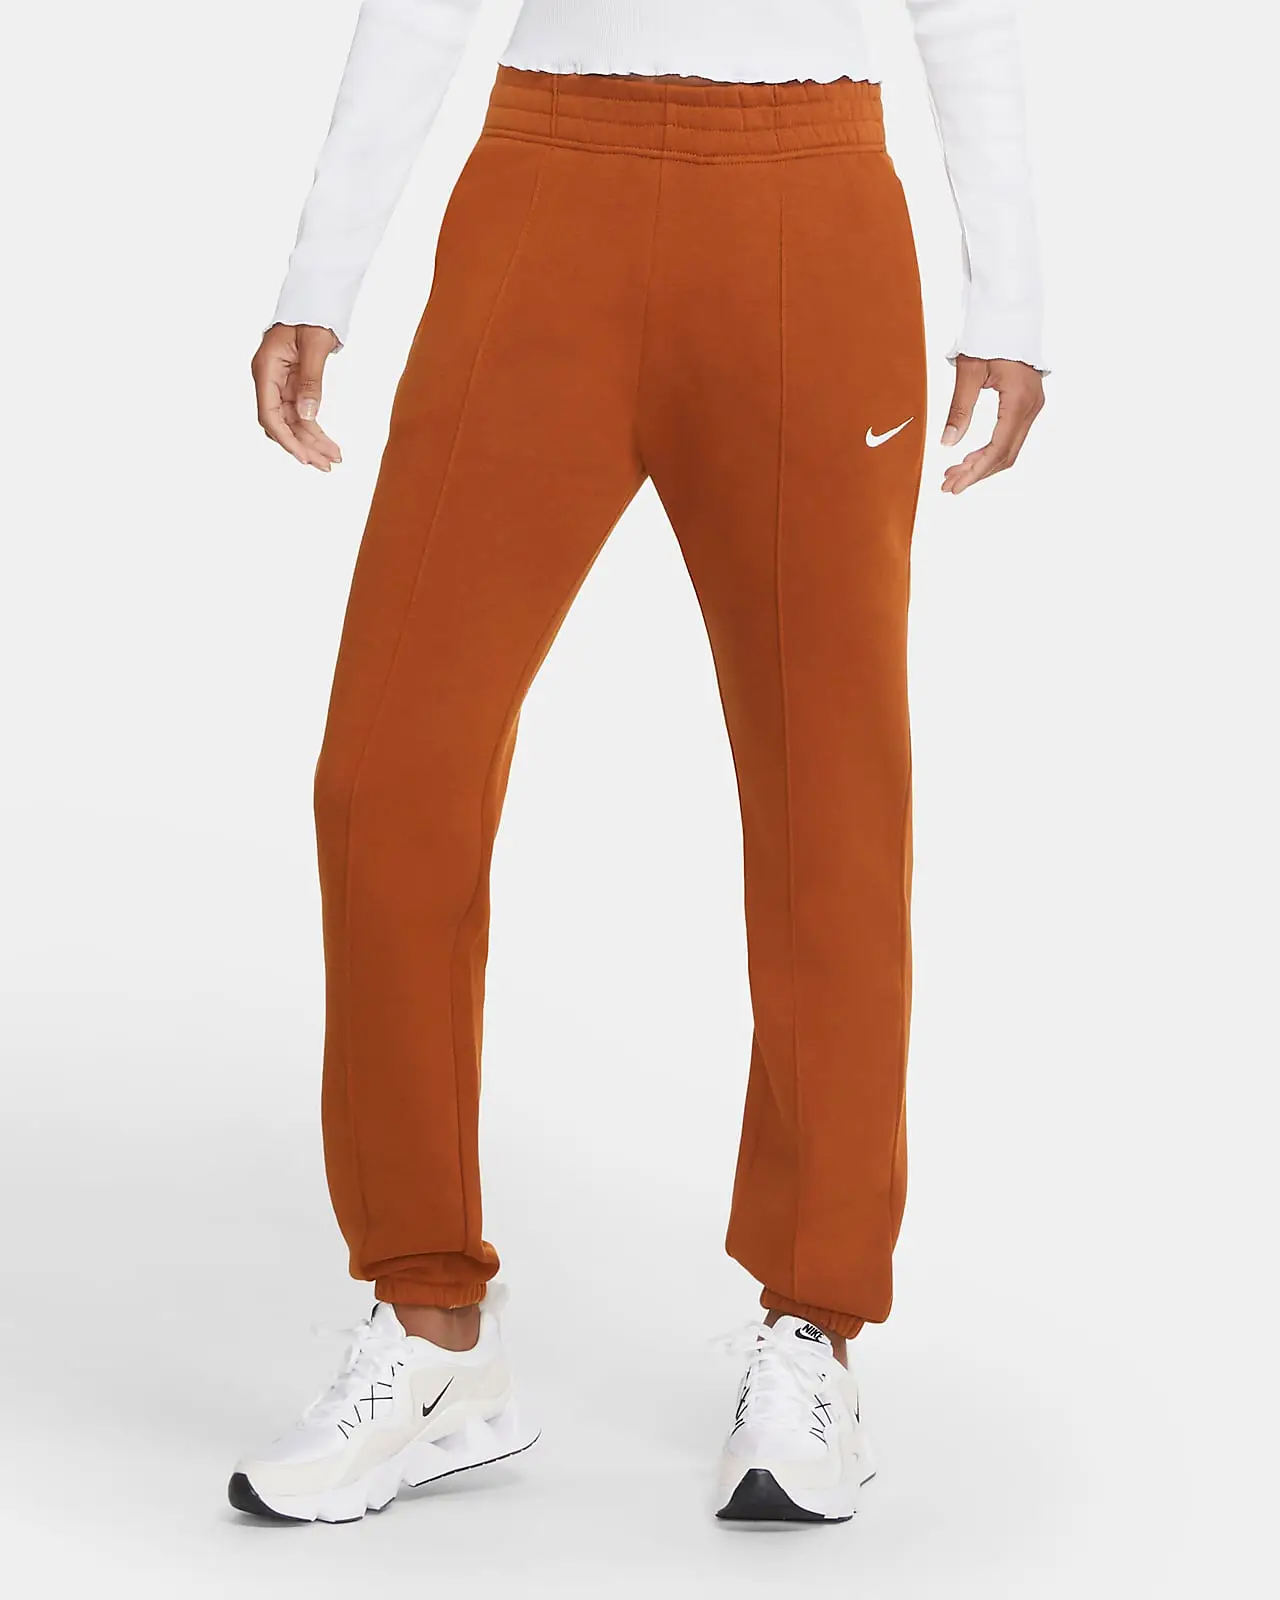 These Nike Sweatpants Are Now All 25% OFF For A Limited Time | The Sole ...